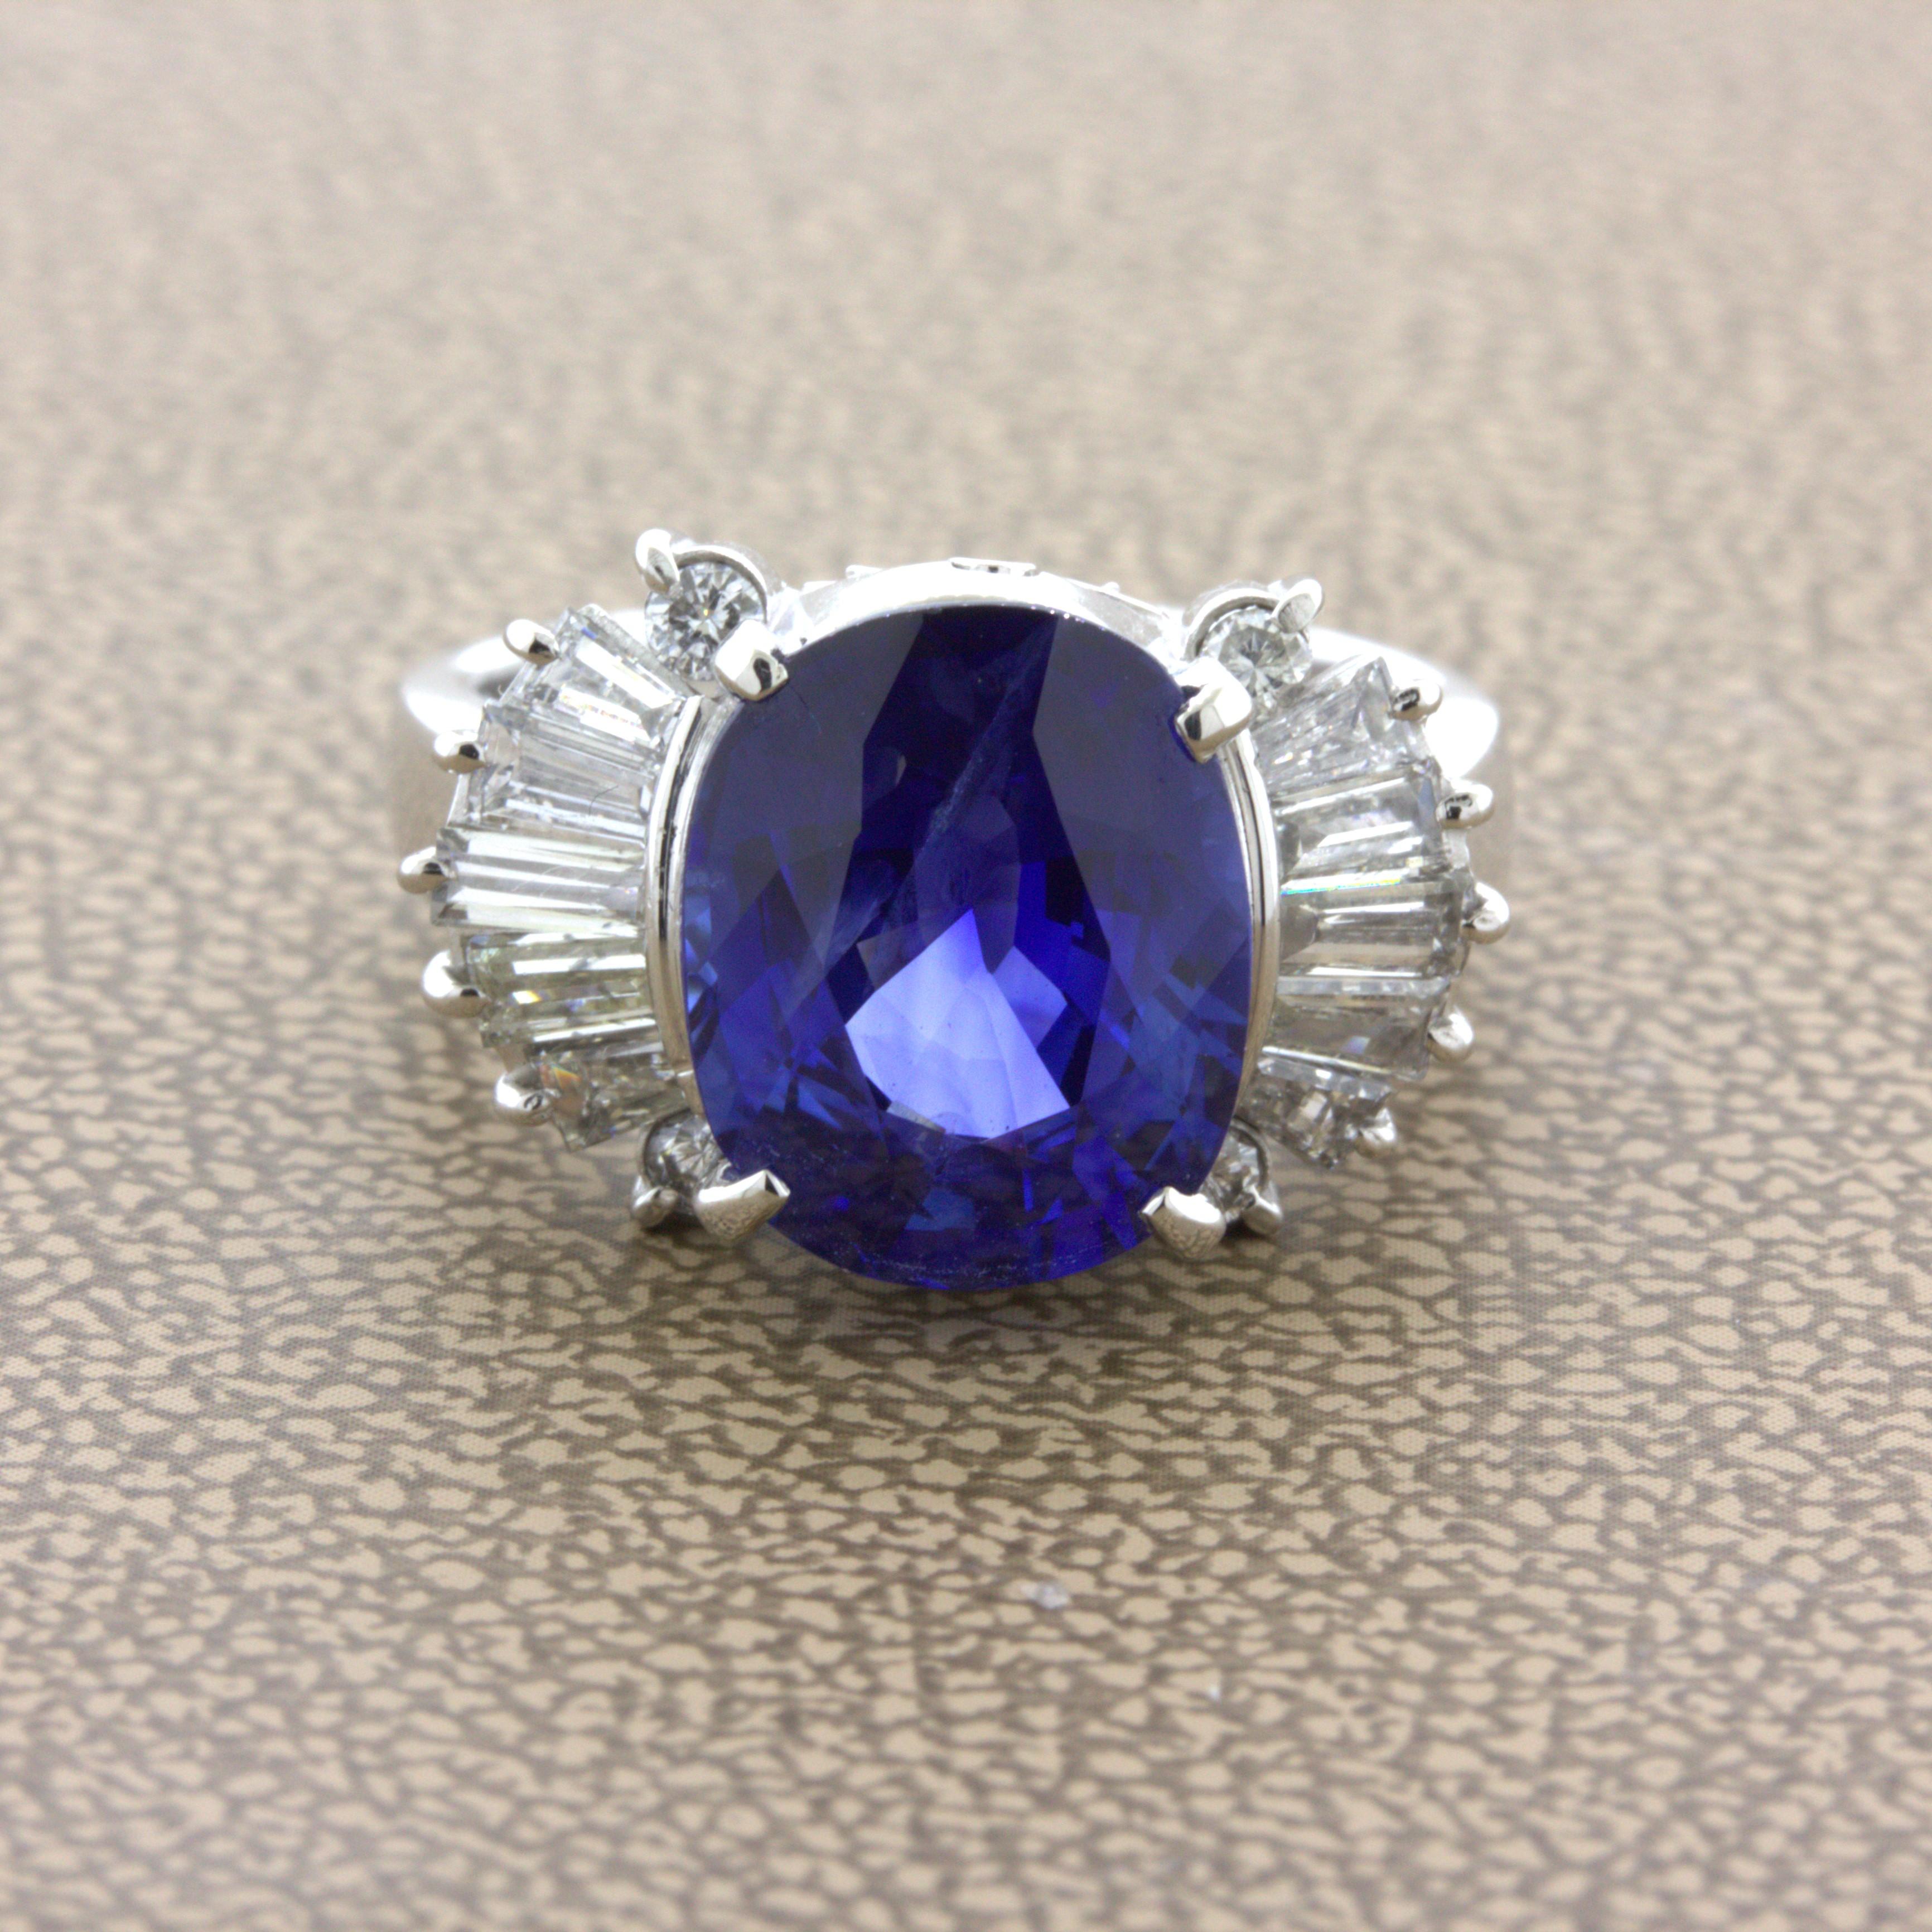 A fine natural gem takes center stage of this platinum diamond ring. It is a 5.26 carat sapphire from Sri Lanka (Ceylon). It has a superb vivid blue color with plenty of brilliance and sparkle making the stone shimmer in the light. It is